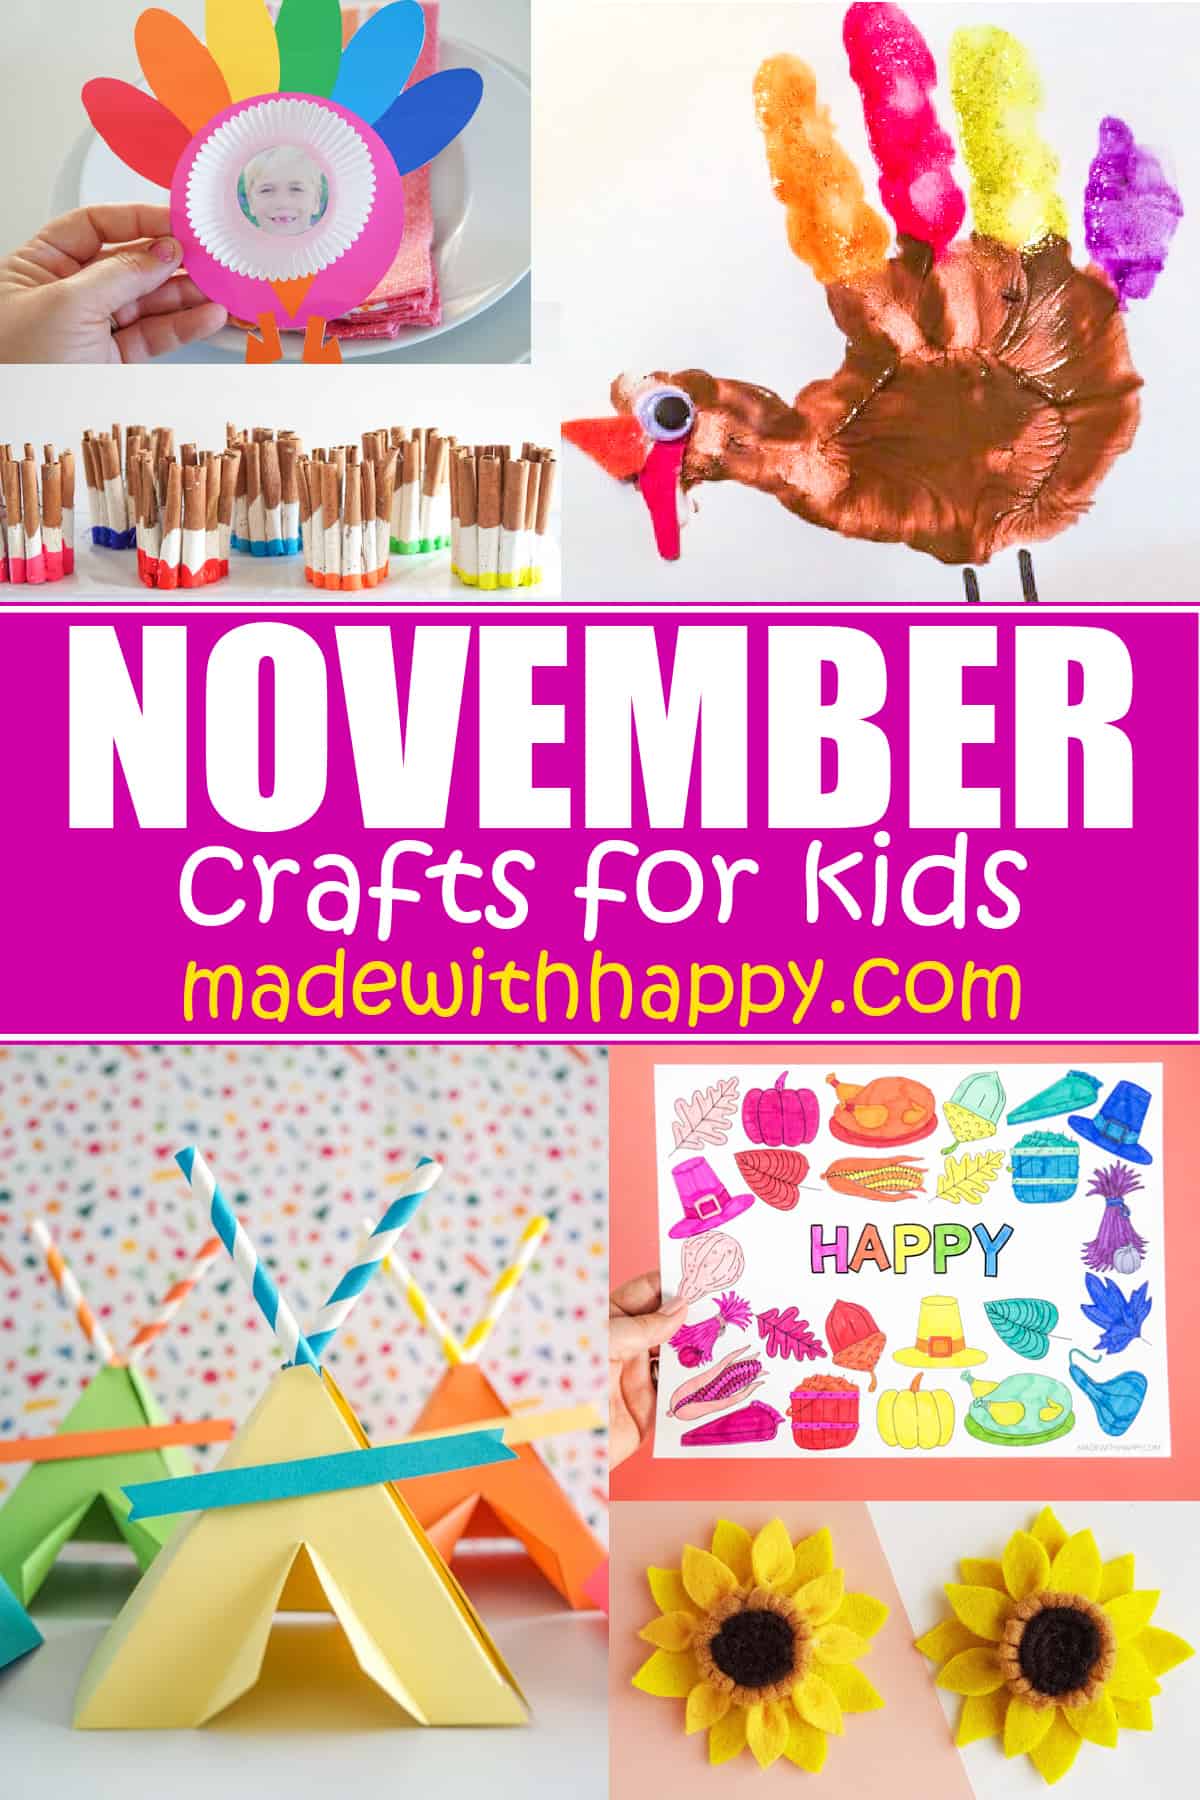 30 Easy Crafts for Teens - It's Always Autumn